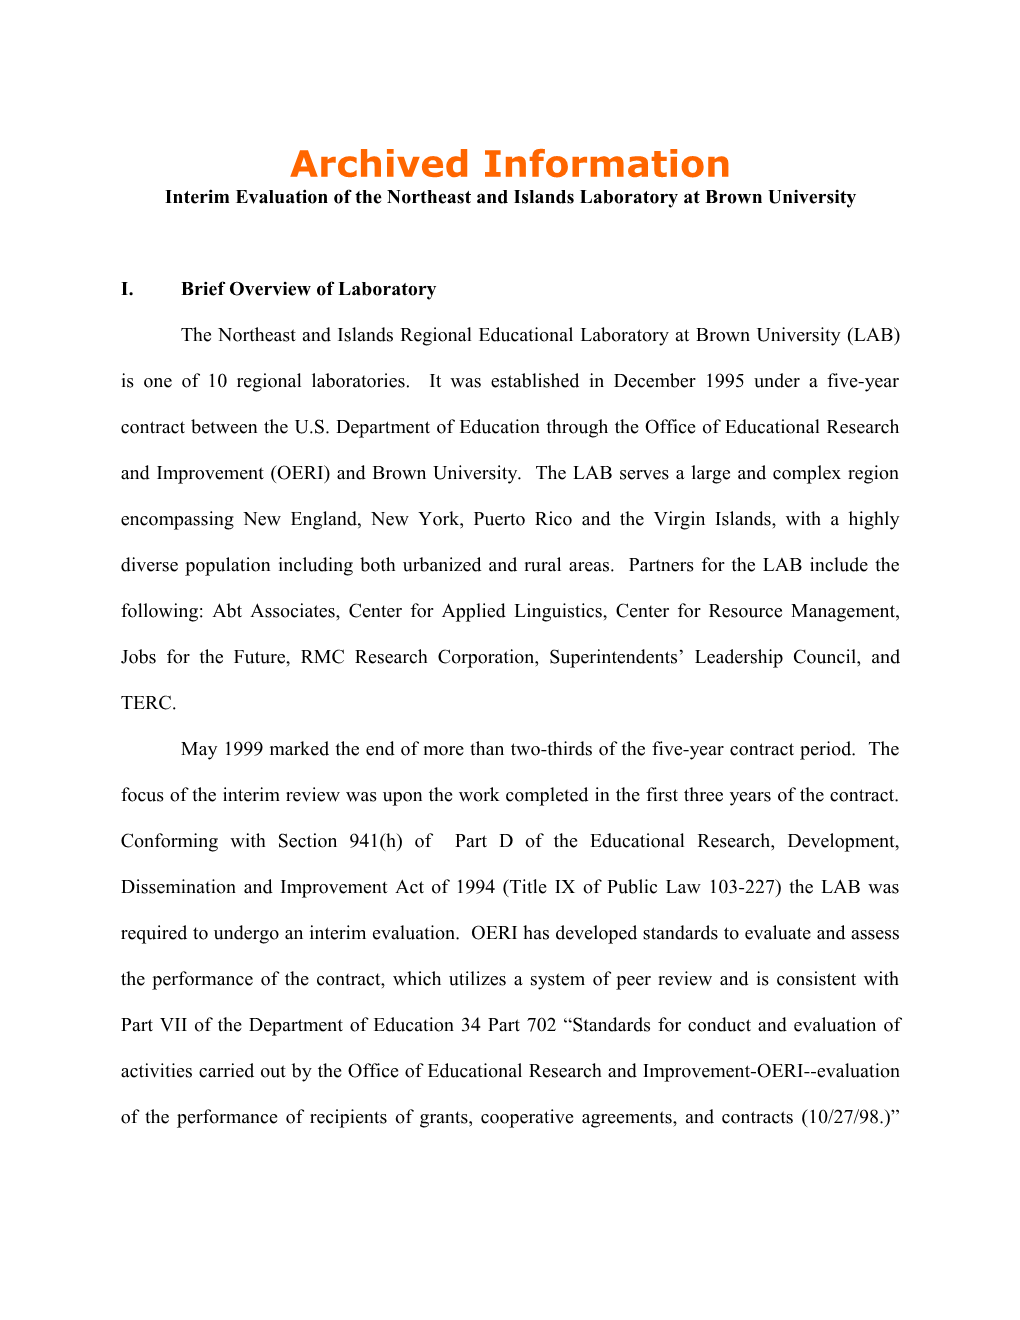 Archived Information Interim Evaluation of the LAB at Brown: Final Individual Written Evaluation